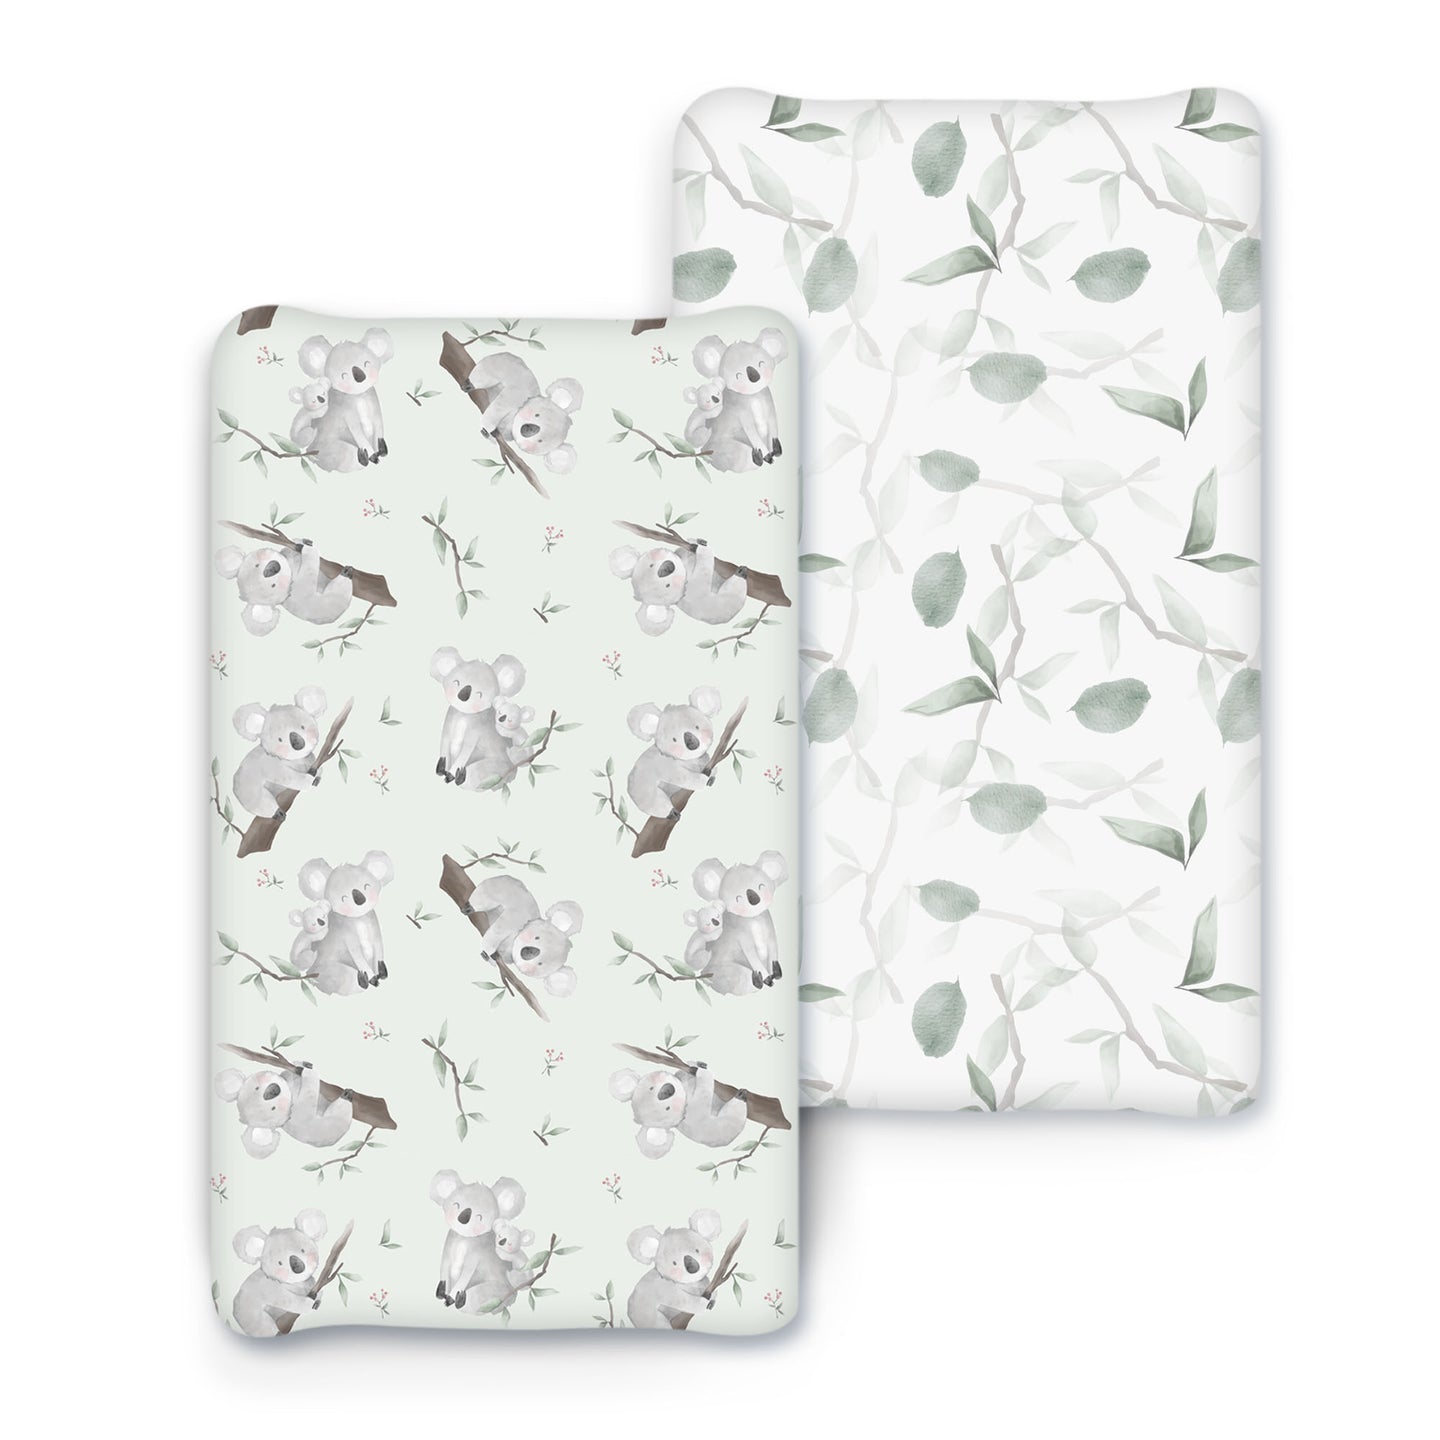 Acrabros Snug Fitted Changing Pad Cover Set Koala leaf